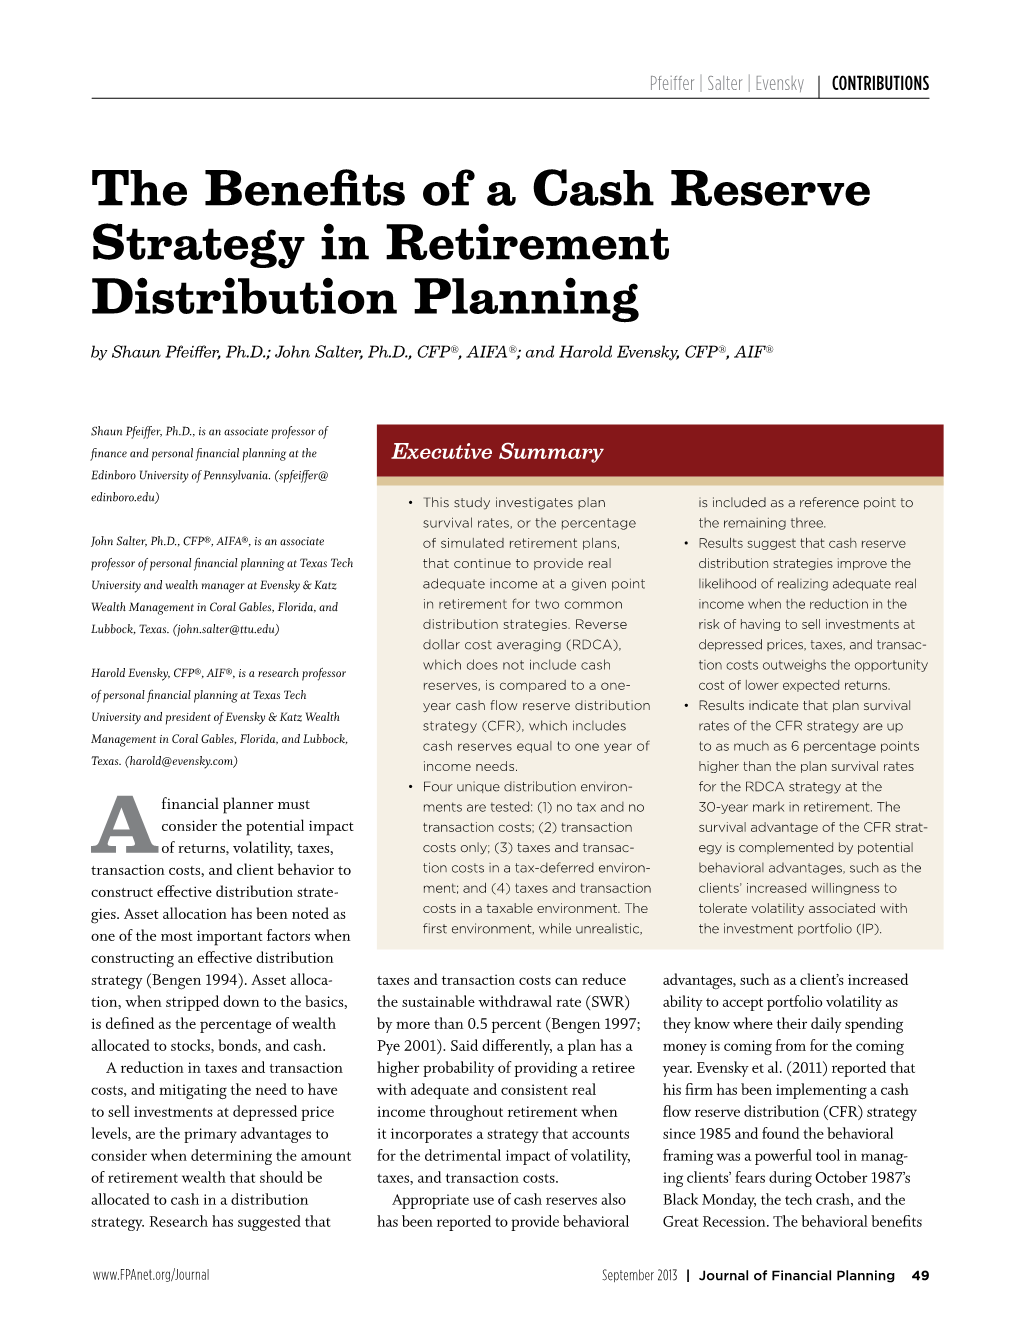 The Benefits of a Cash Reserve Strategy in Retirement Distribution Planning by Shaun Pfeiffer, Ph.D.; John Salter, Ph.D., CFP®, AIFA®; and Harold Evensky, CFP®, AIF®